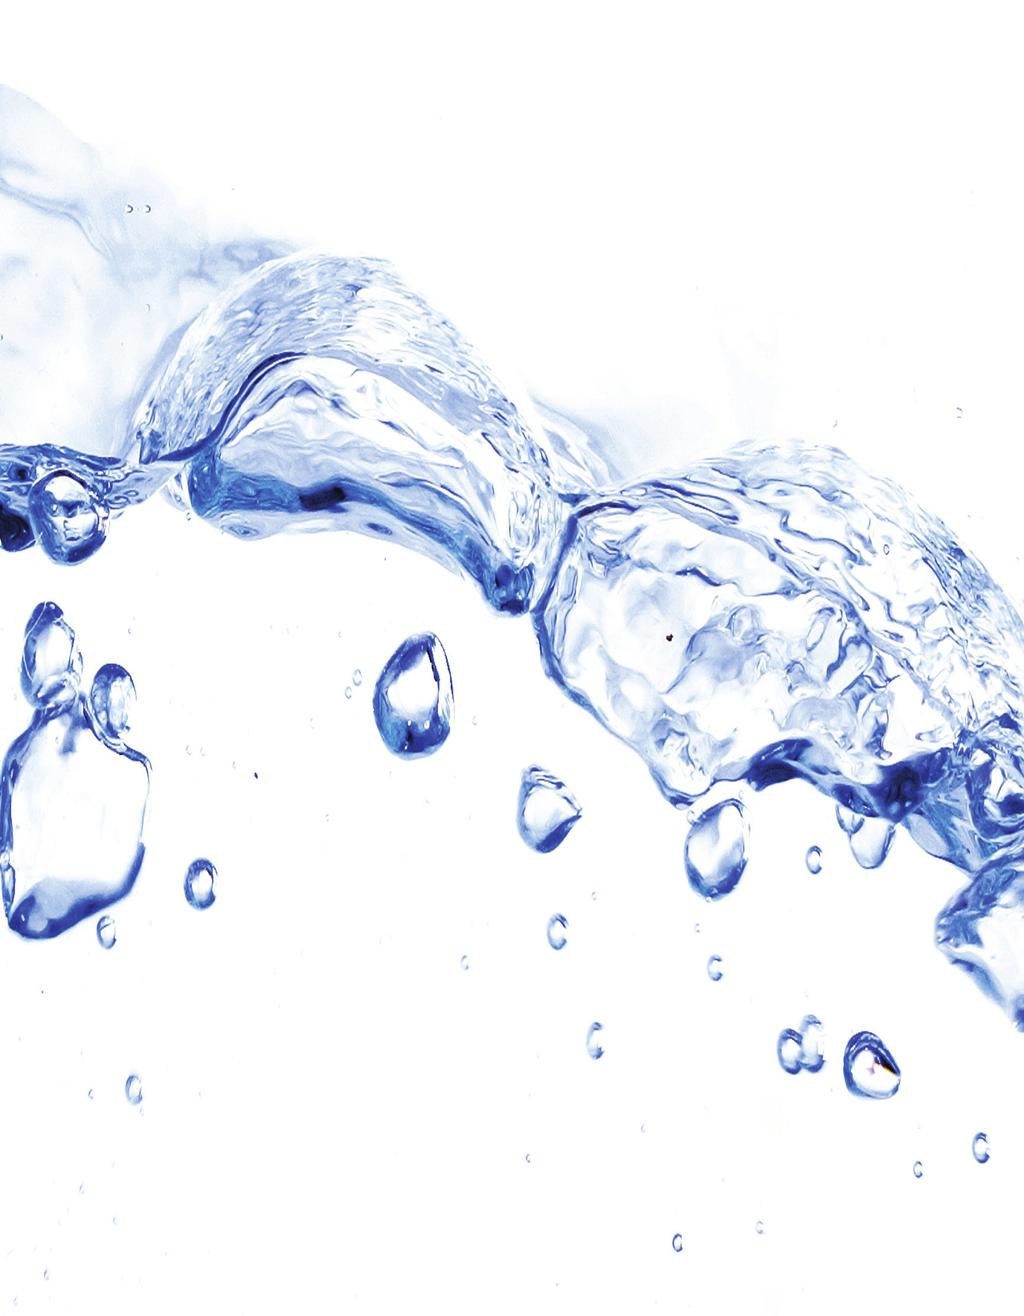 Industrial Water Clarification Solutions let us clear things up 9446 North 107th Street Milwaukee, WI 53224